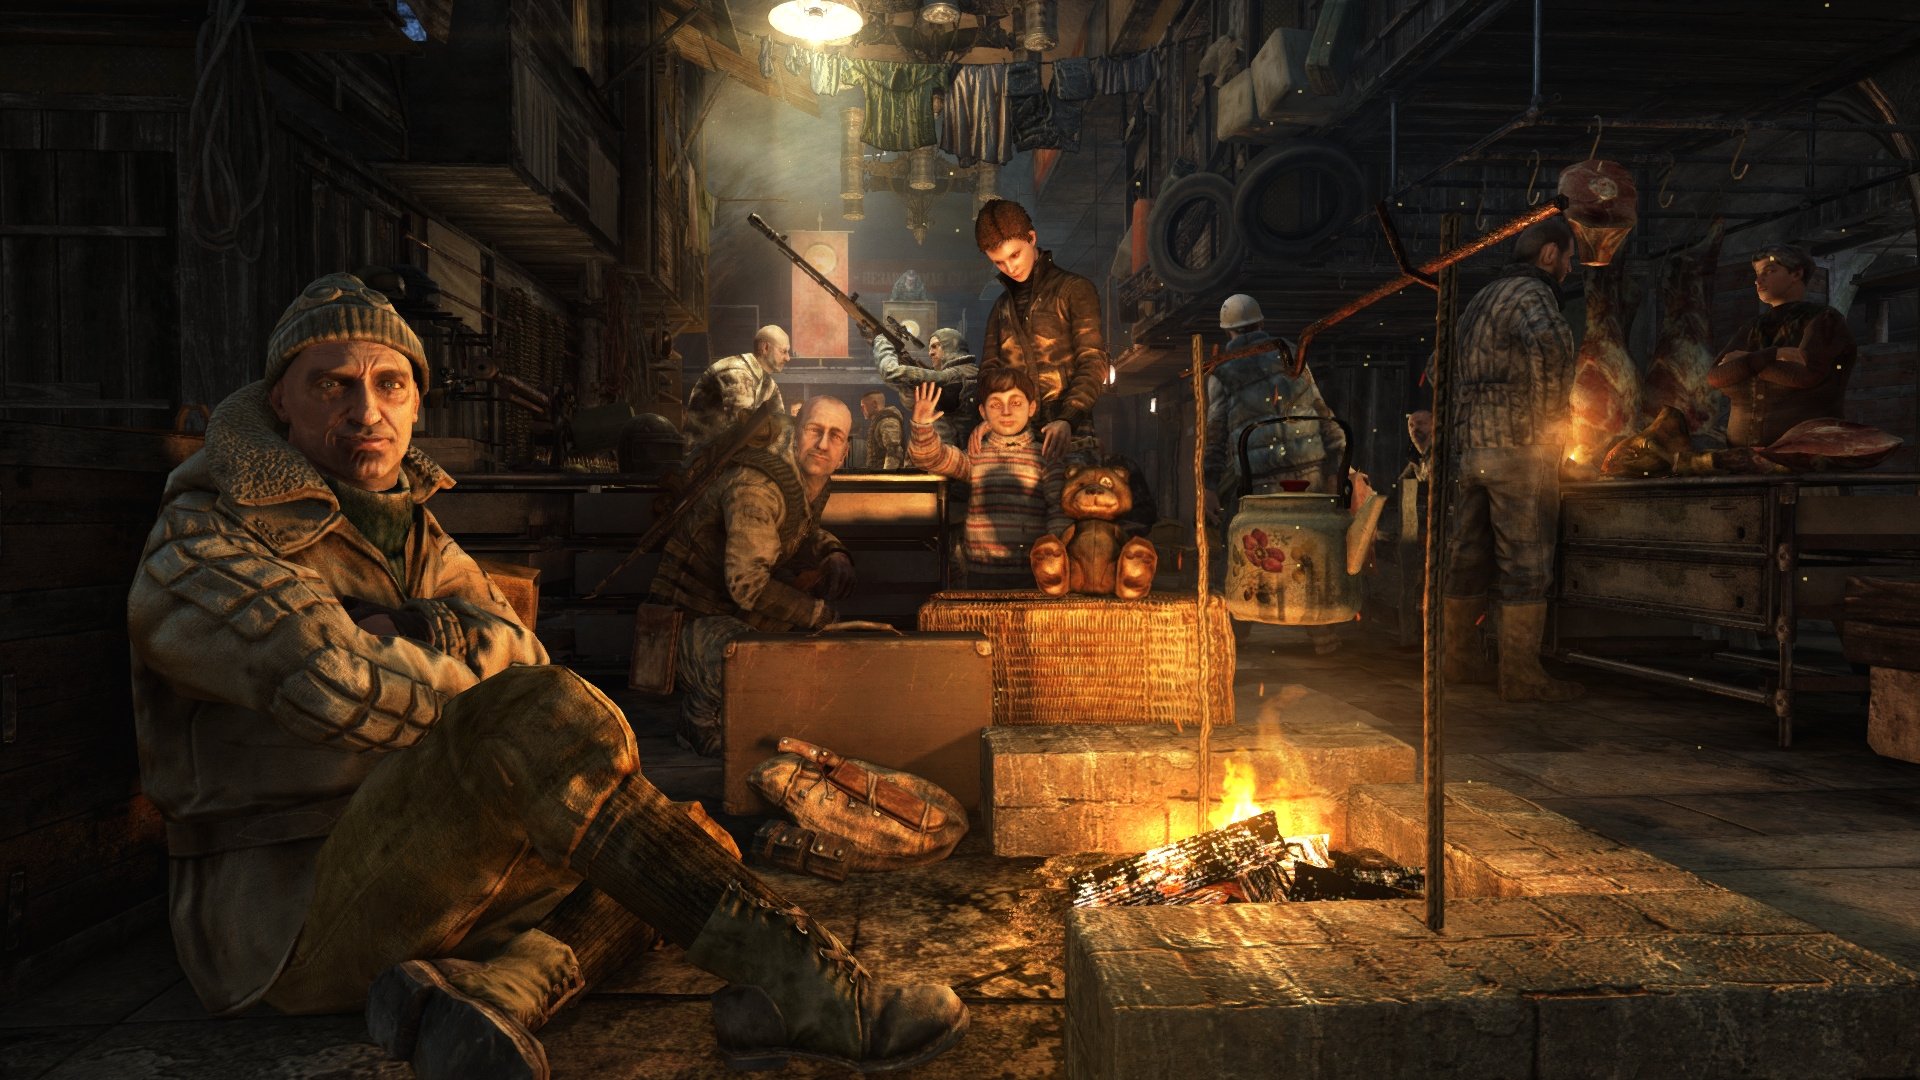 Metro Redux (PS4 / PlayStation 4) Game Profile News, Reviews, Videos